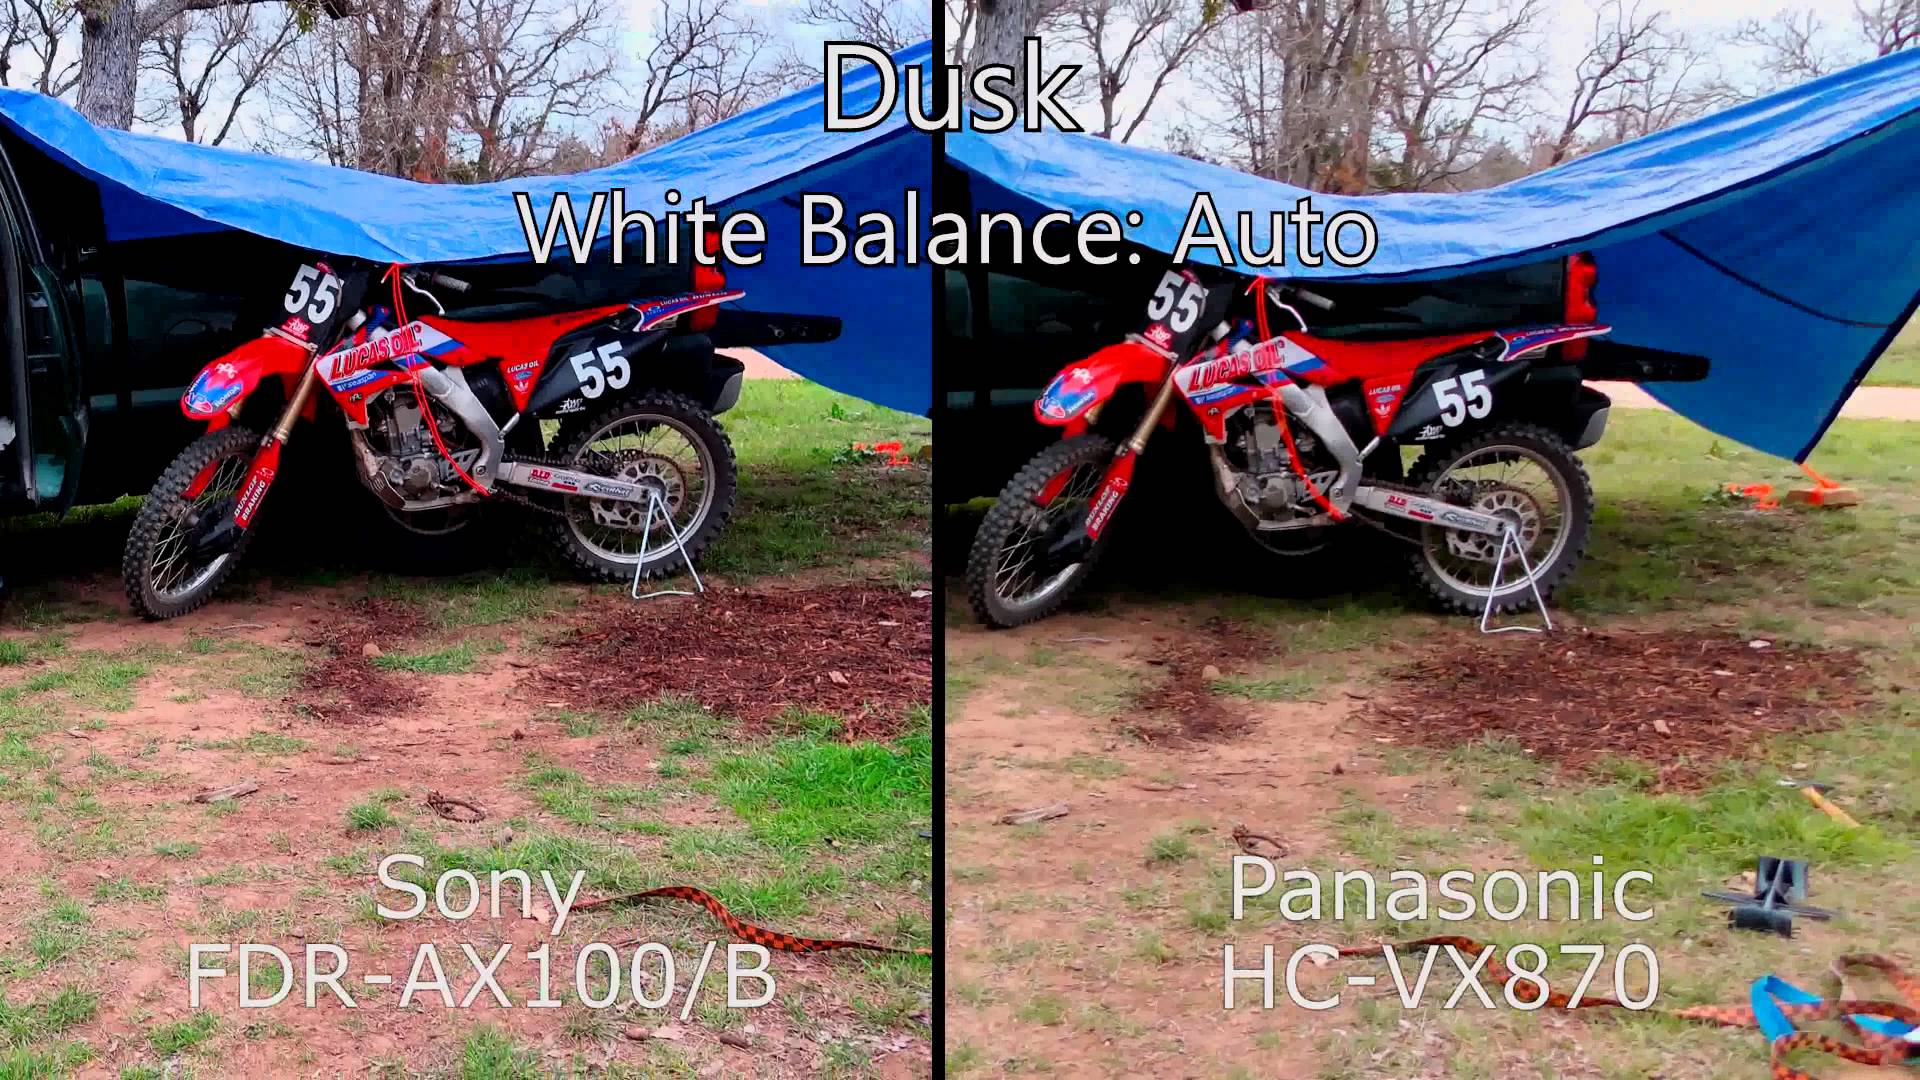 Sony FDR-AX100 vs Panasonic HC-VX870 — Video camera outdoor side-by-side comparison